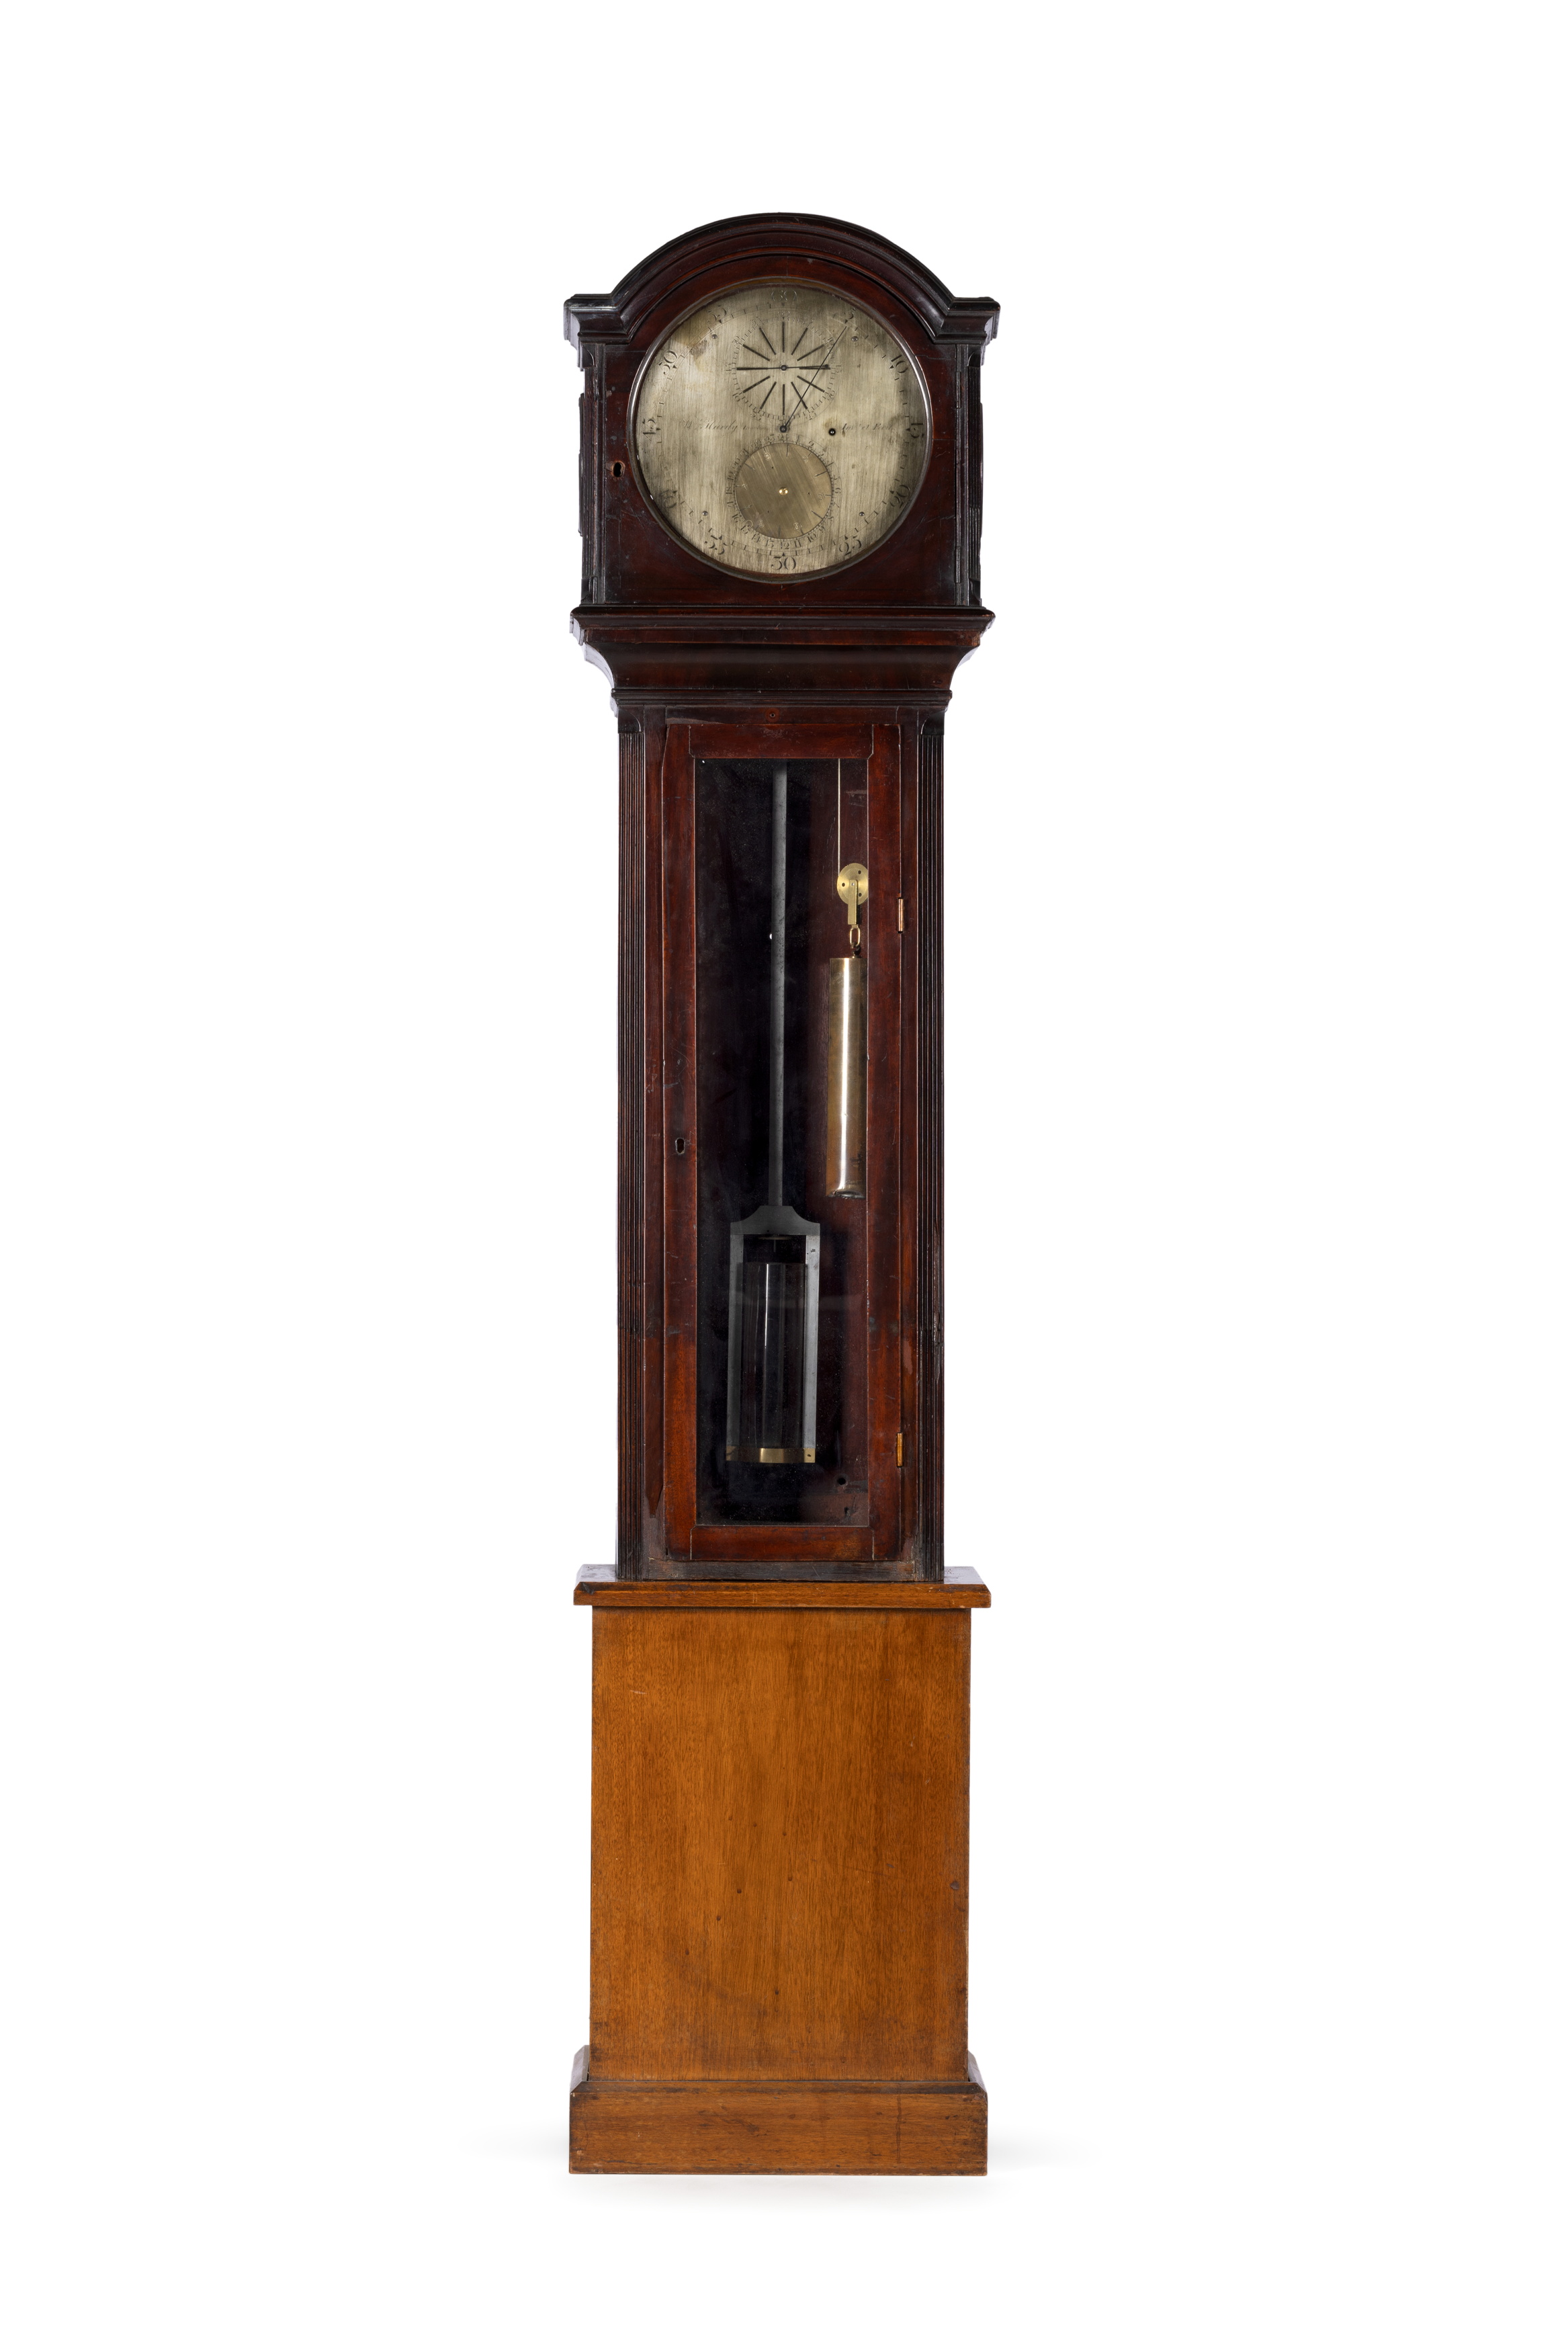 Sidereal-time regulator clock made by William Hardy